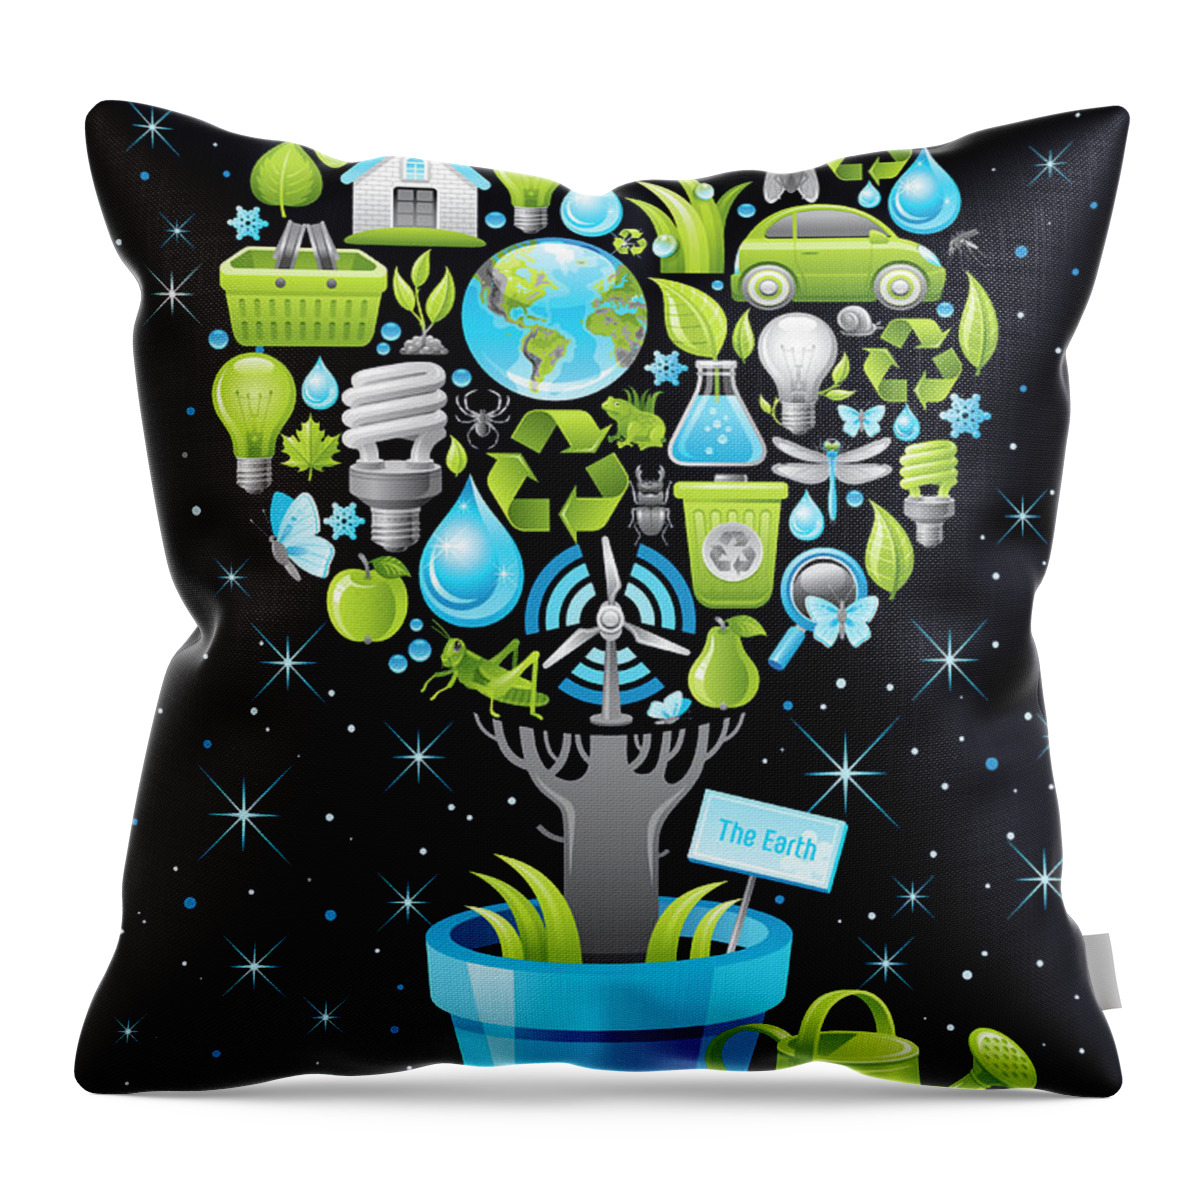 Atmosphere Throw Pillow featuring the digital art Ecological Poster With Tree In by O-che